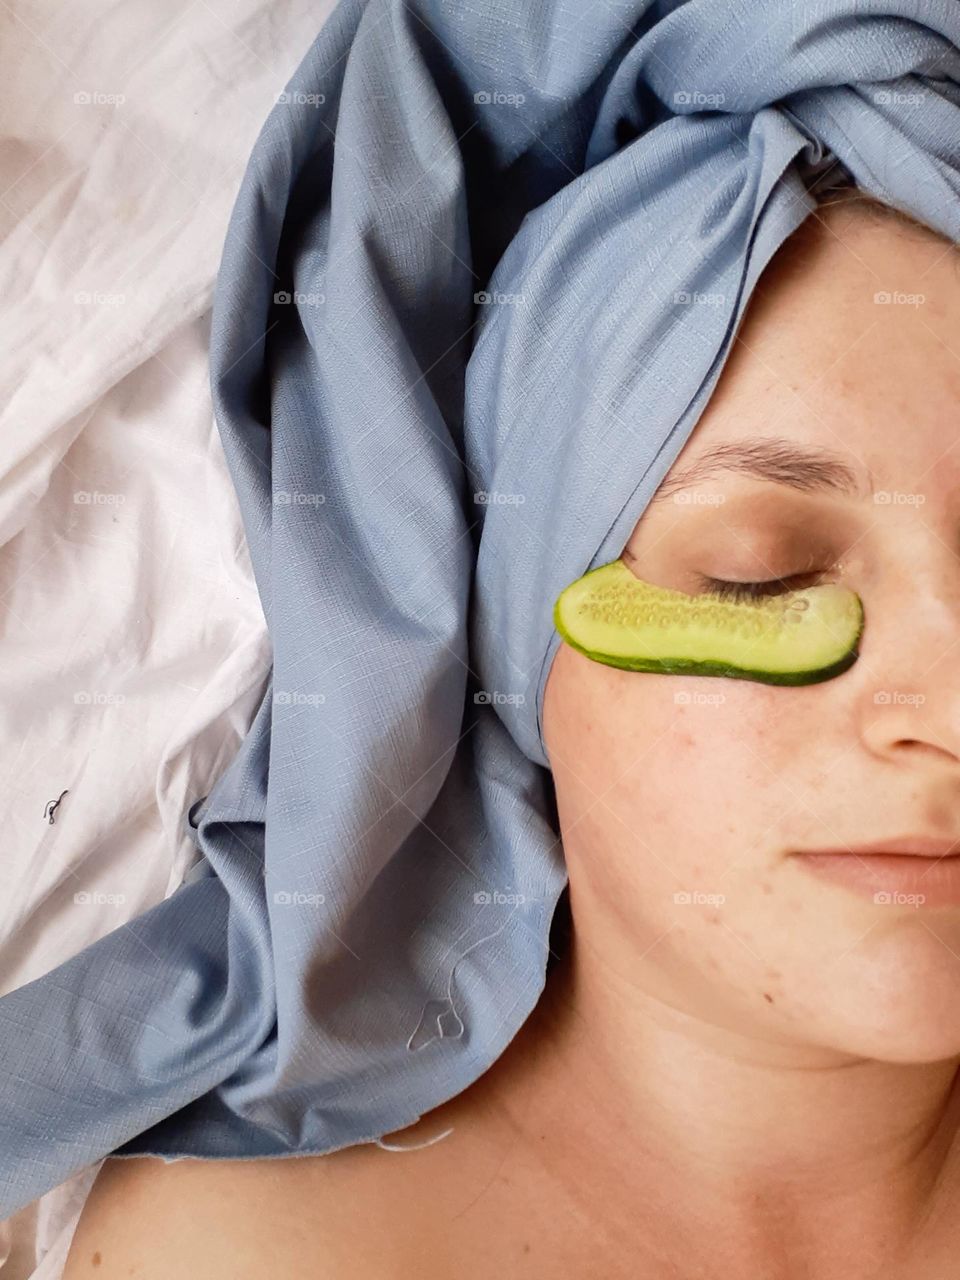 the girl relaxes during homemade cosmetic procedures, namely cucumber masks